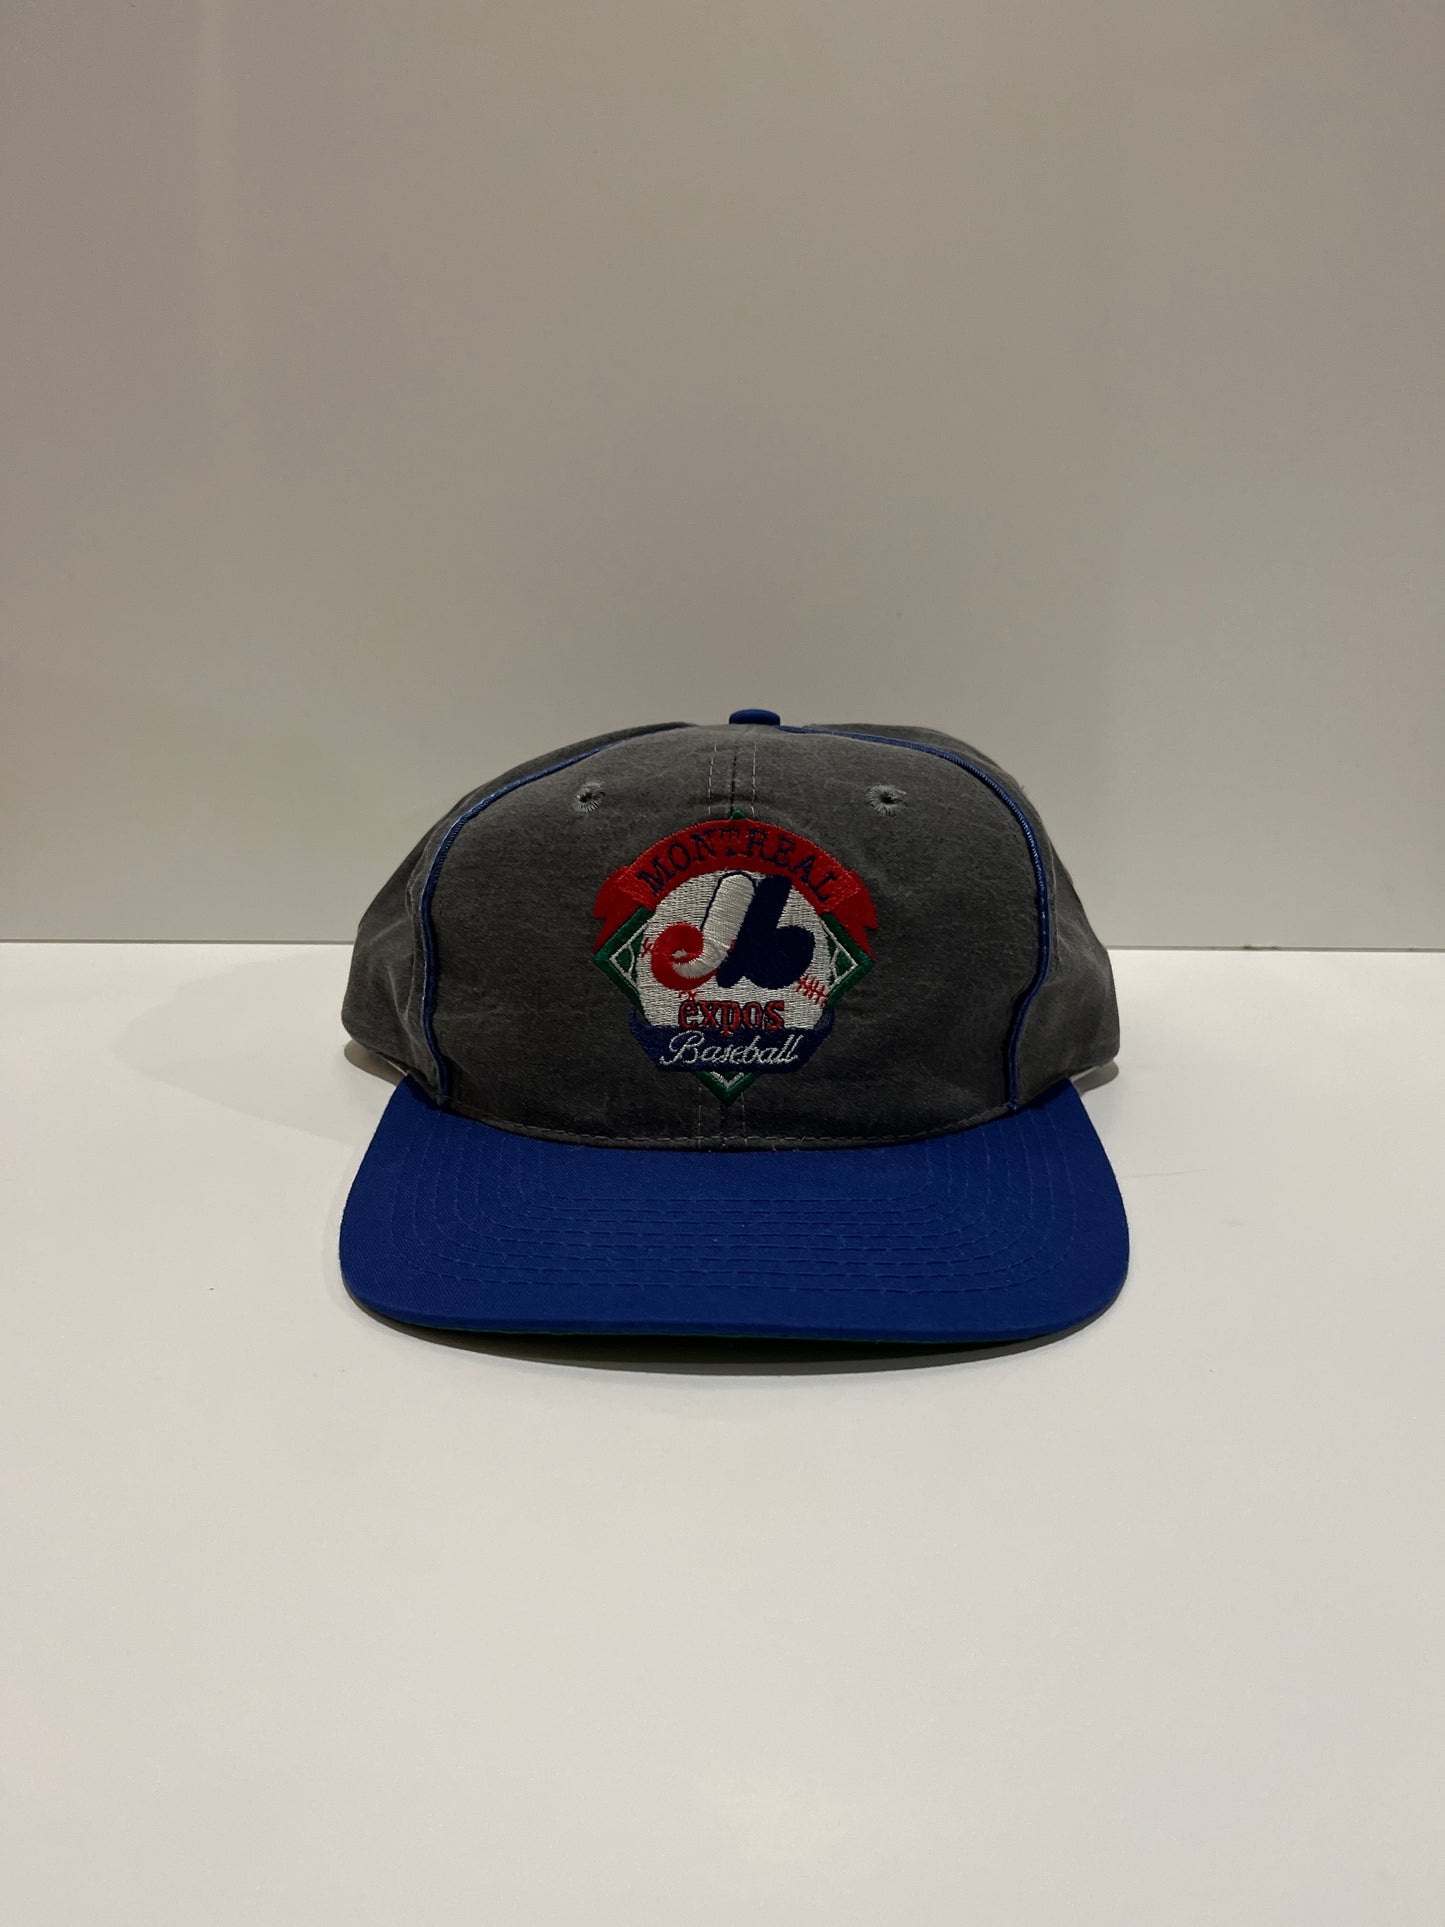 Vintage The Game Montreal Expos Snapback